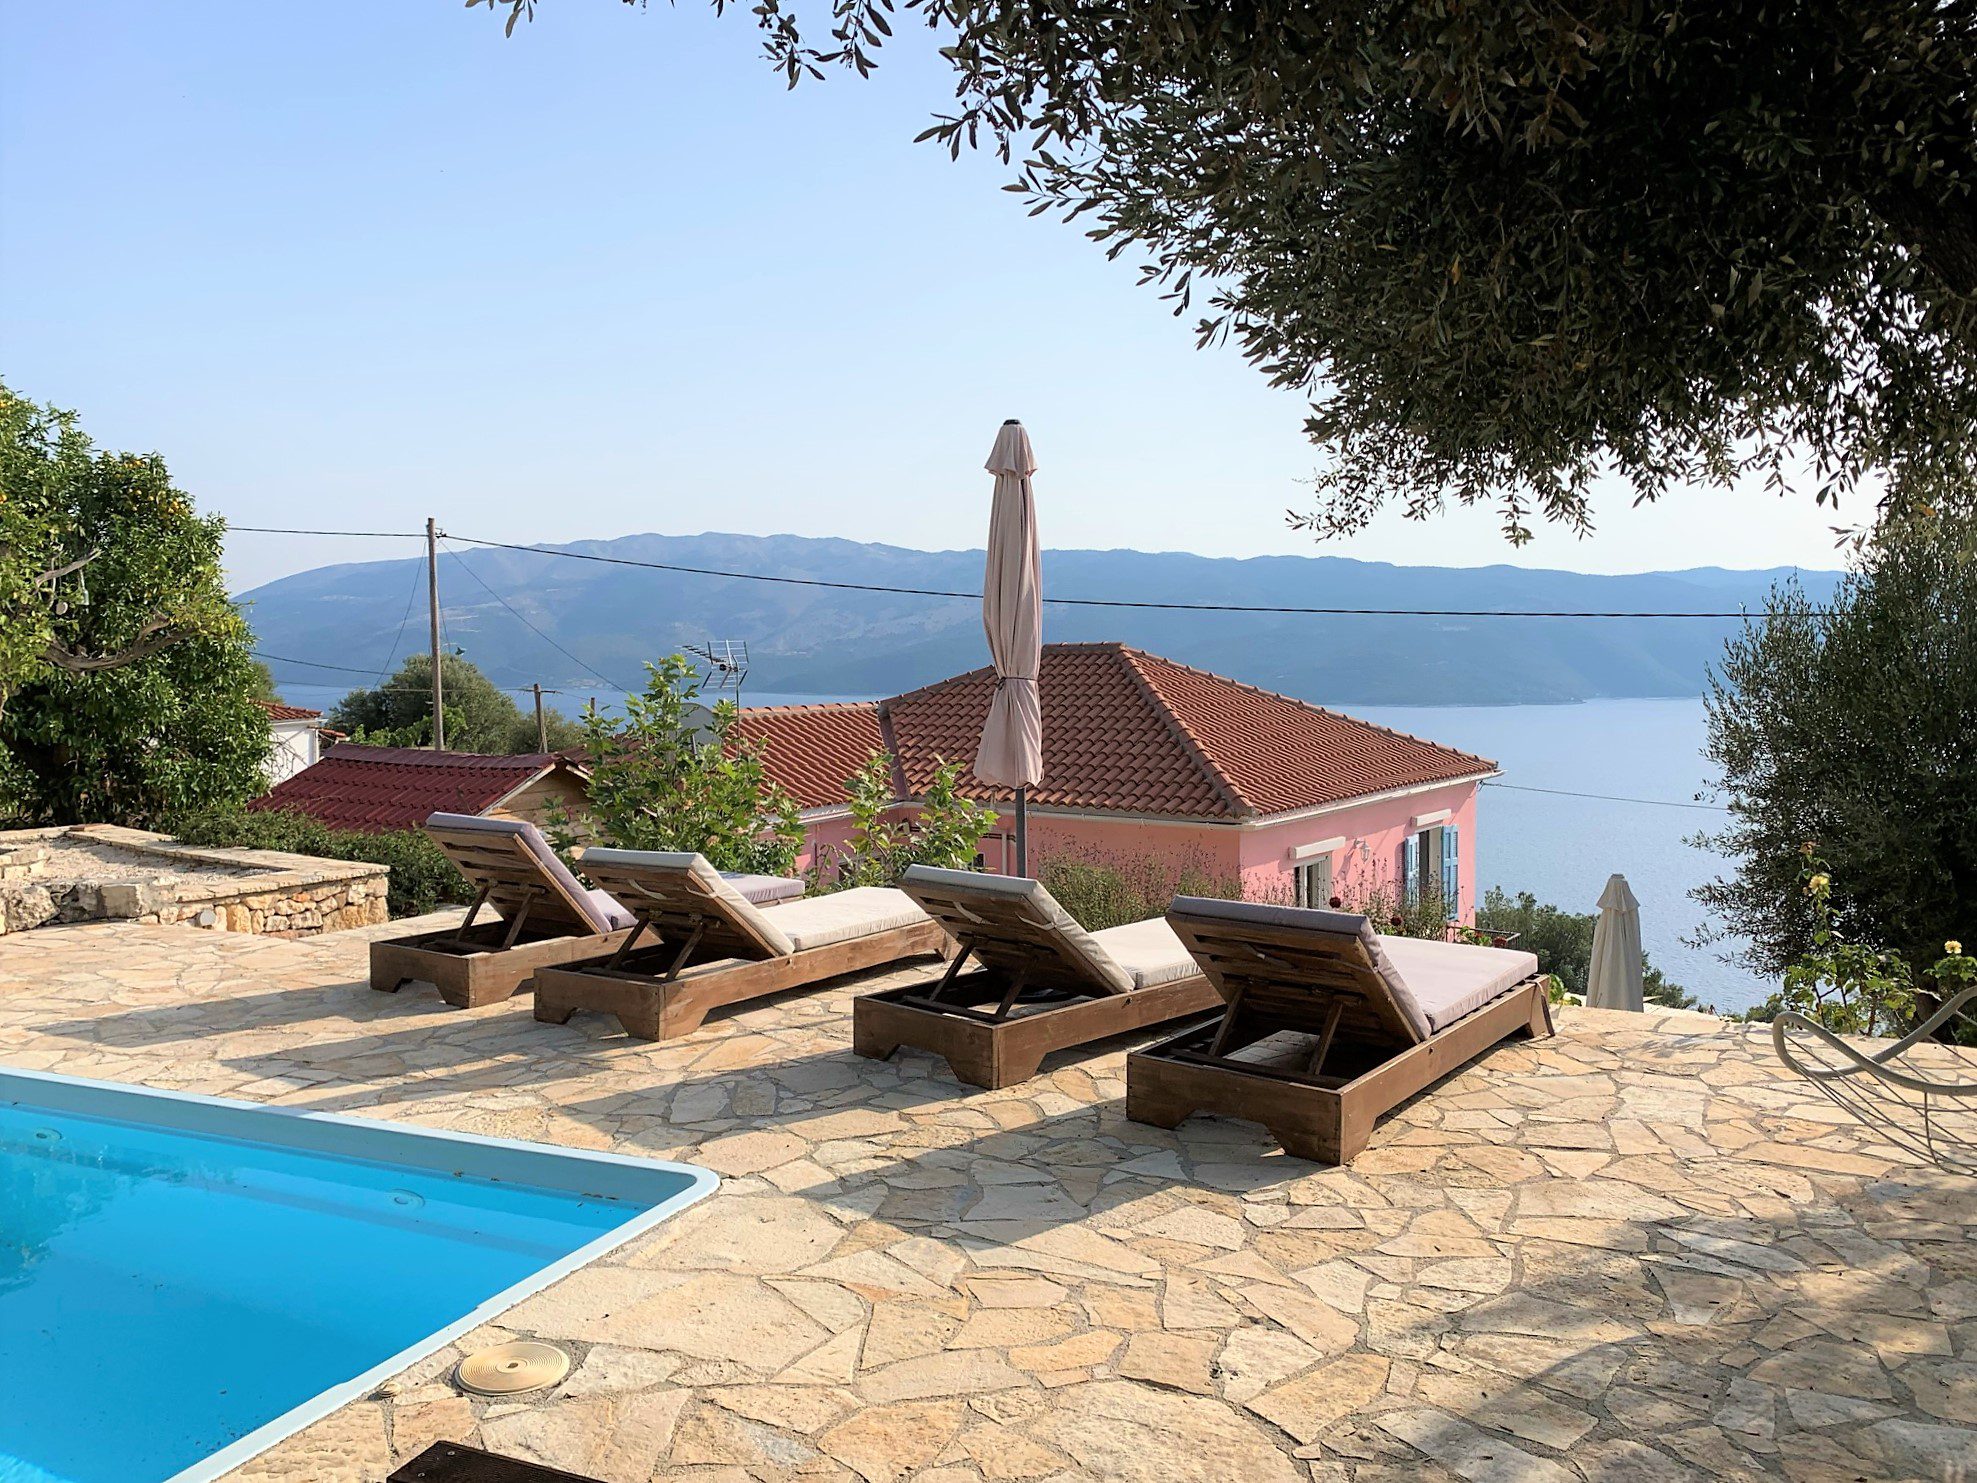 Swimming pool of house for sale in Ithaca Greece, Lefki